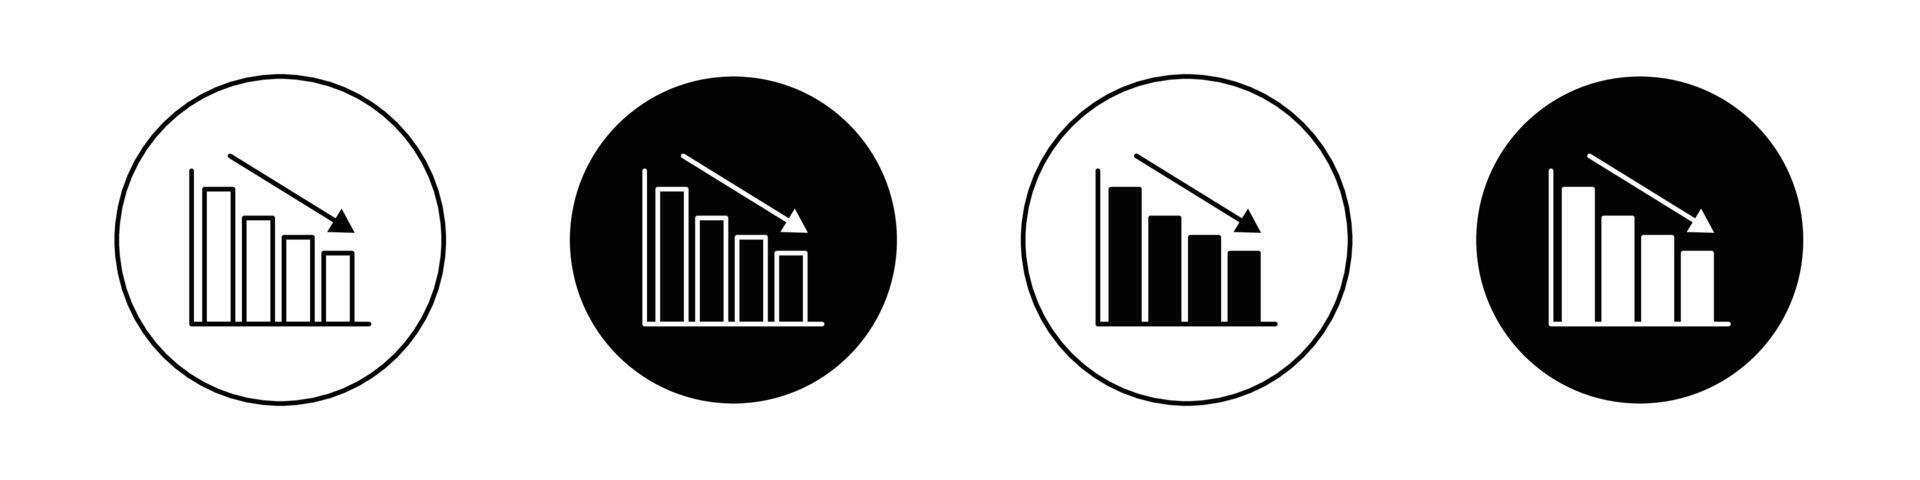 Reduction chart icon vector